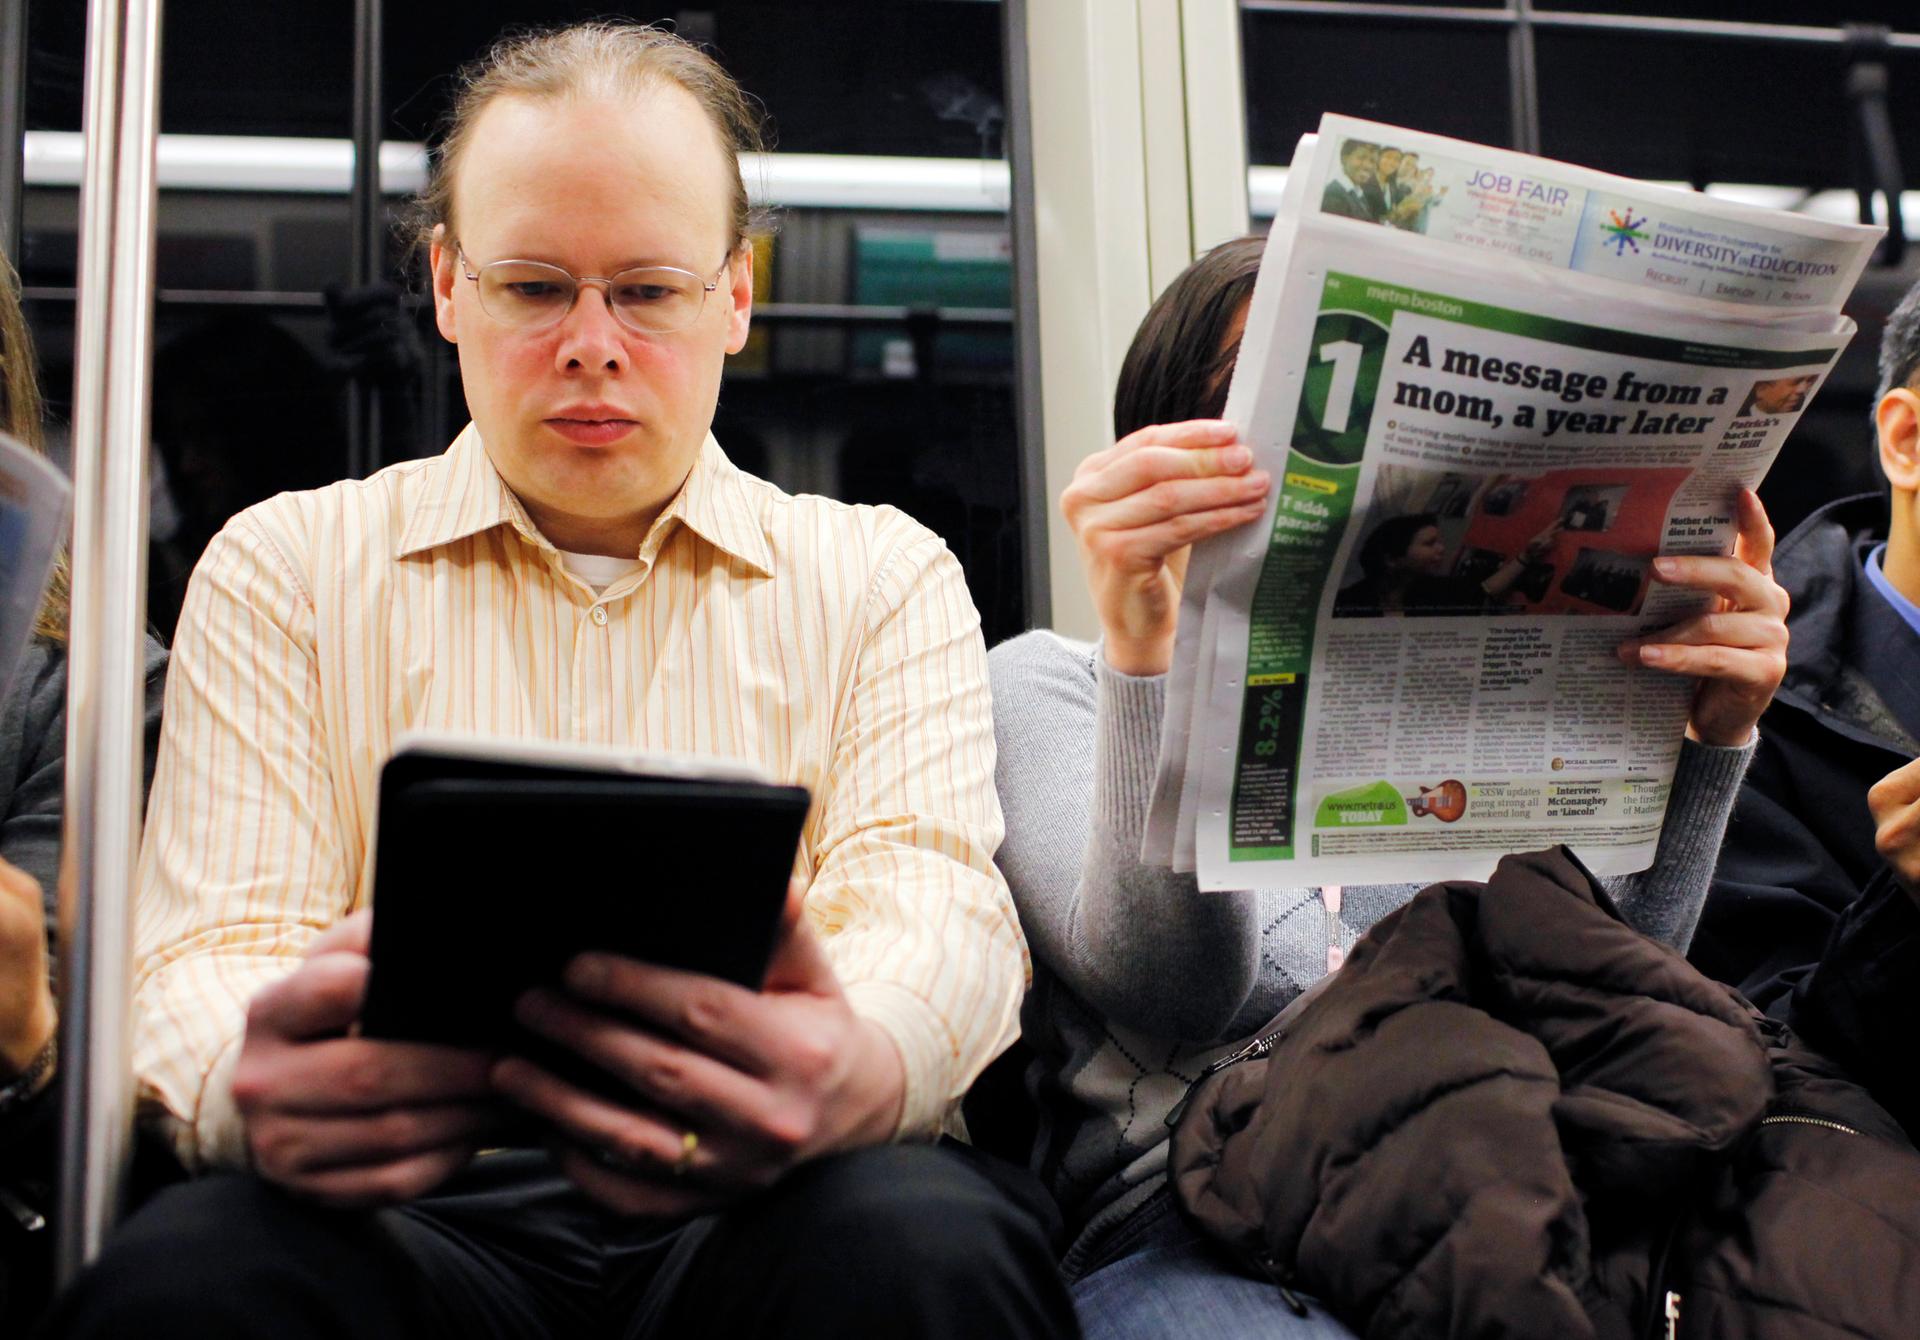 A commuter reads on a Kindle e-reader while riding the subway in Cambridge, Mass. Neuroscience says the way his brain treats reading on the Kindle is different than the way the brain processes the newspaper next to him.